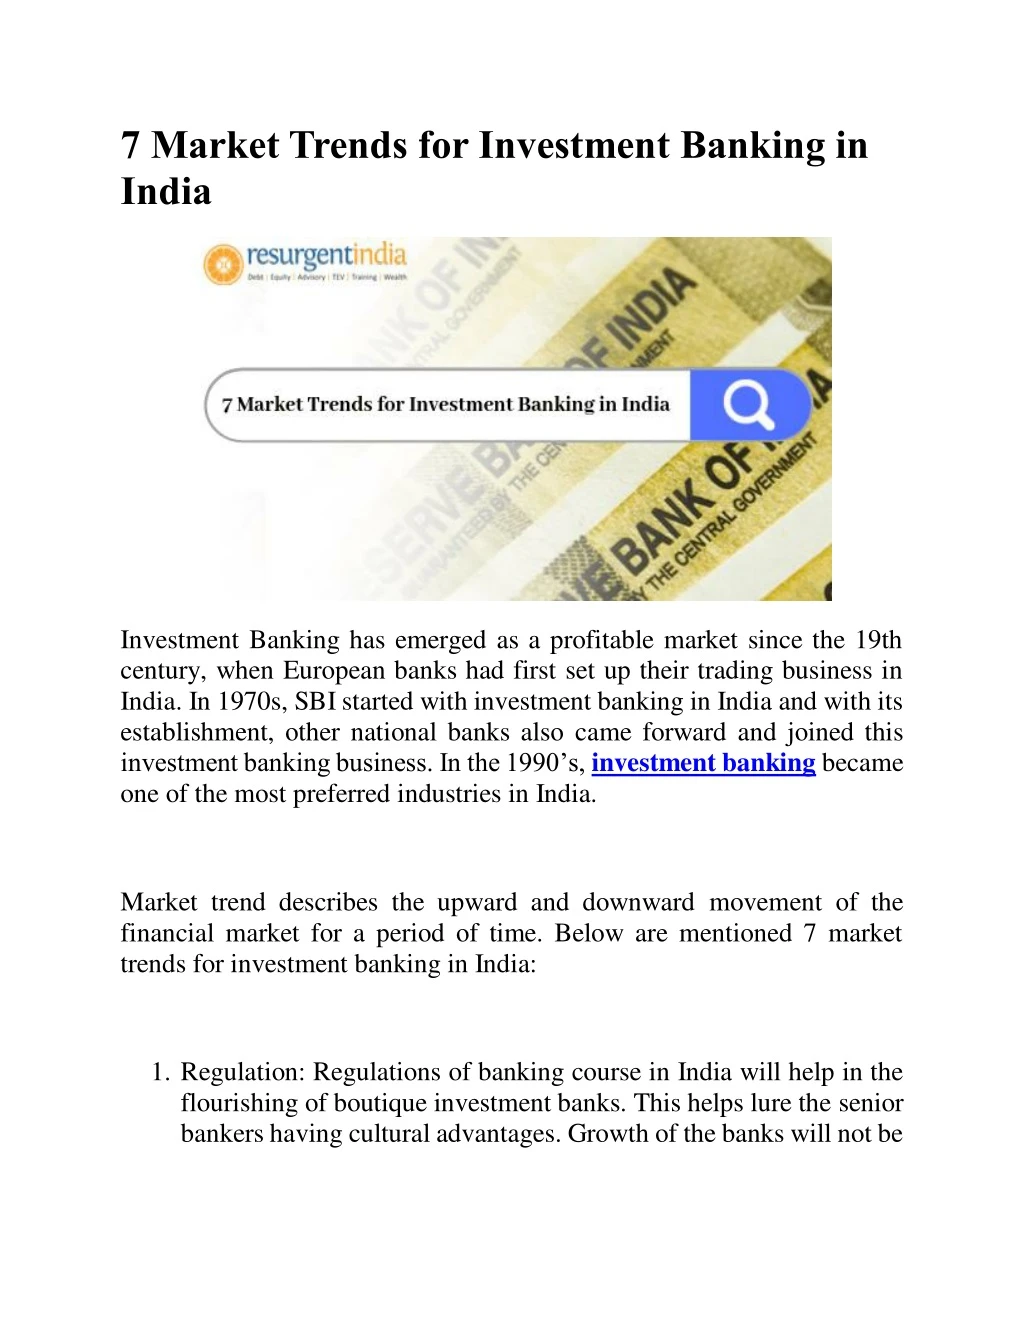 7 market trends for investment banking in india